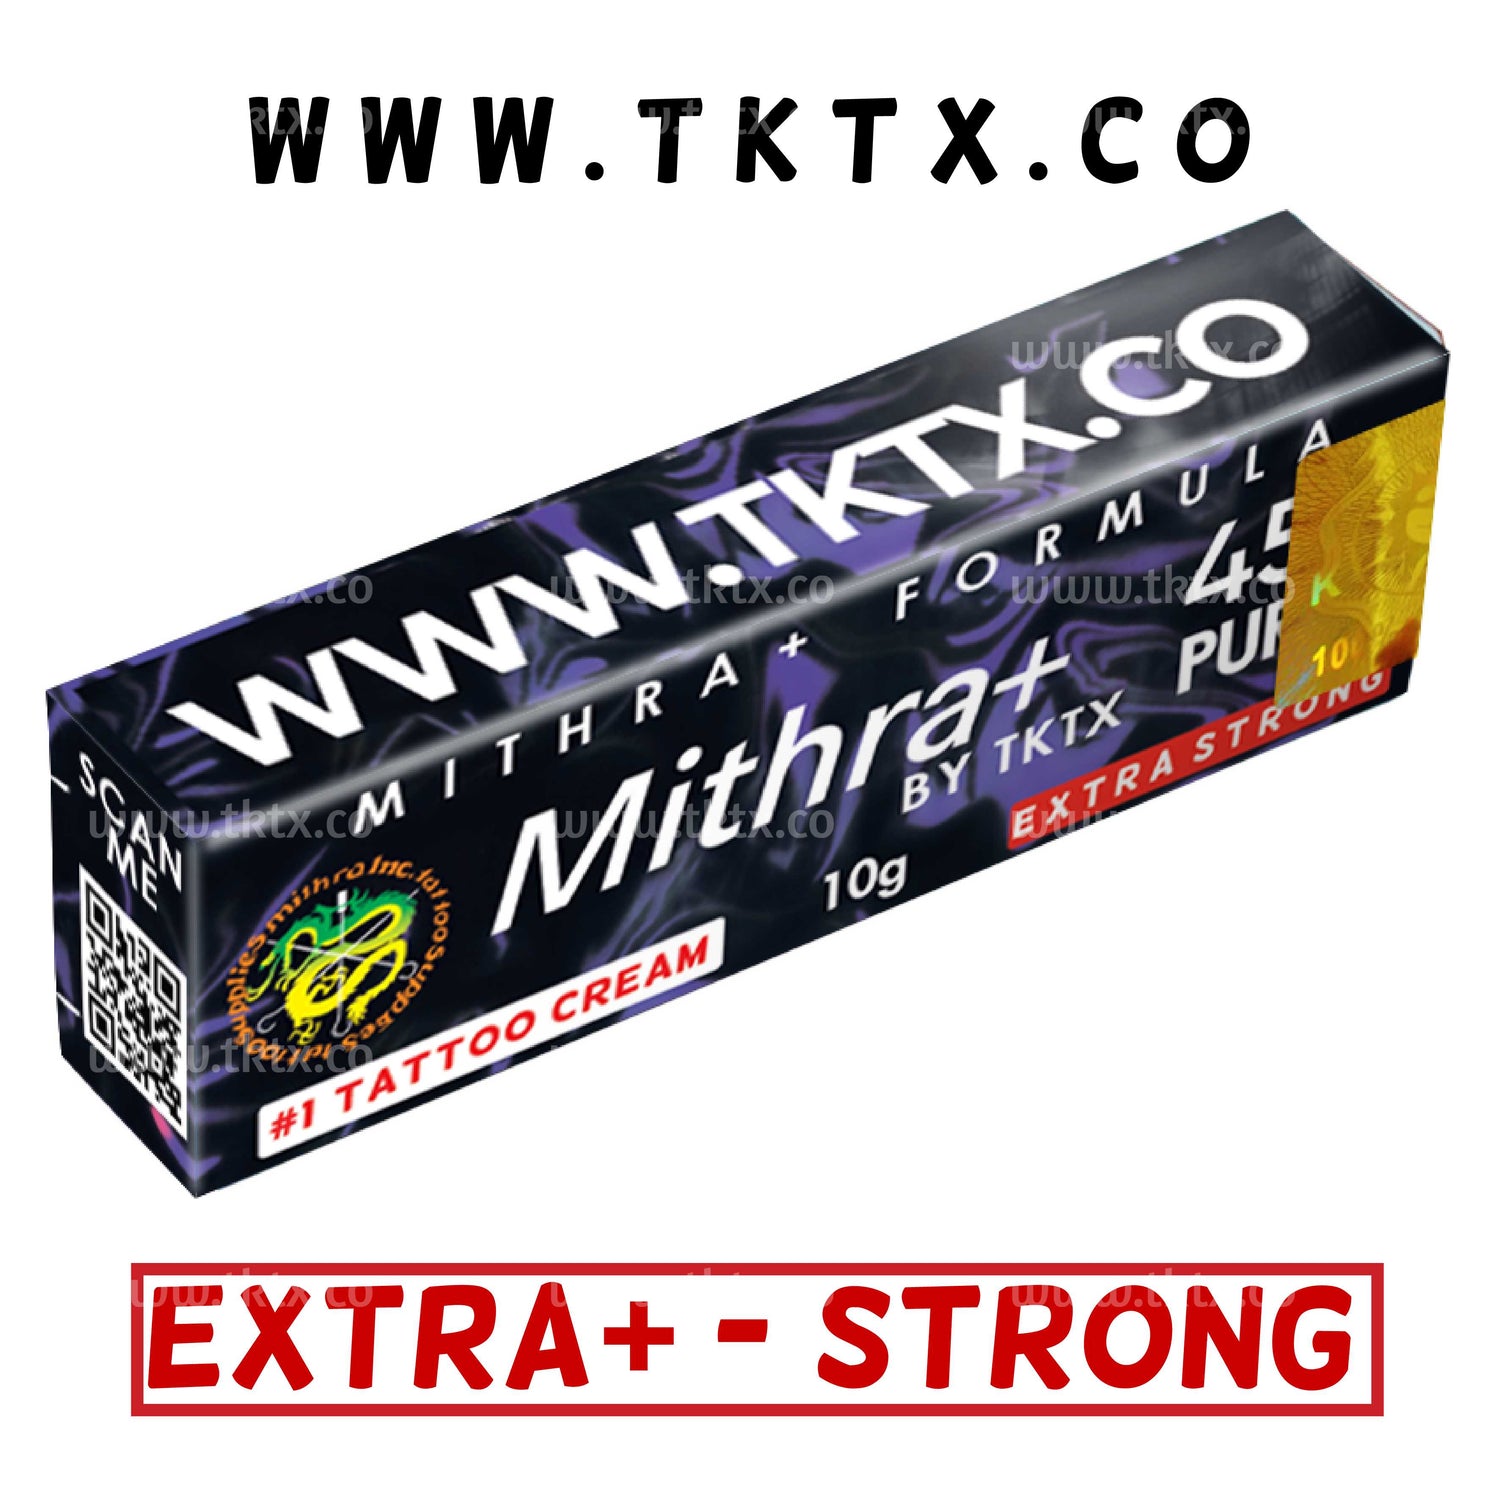 Mithra by TKTX 45% Purple - EXTRA STRONG - Numbing Cream Mithra+